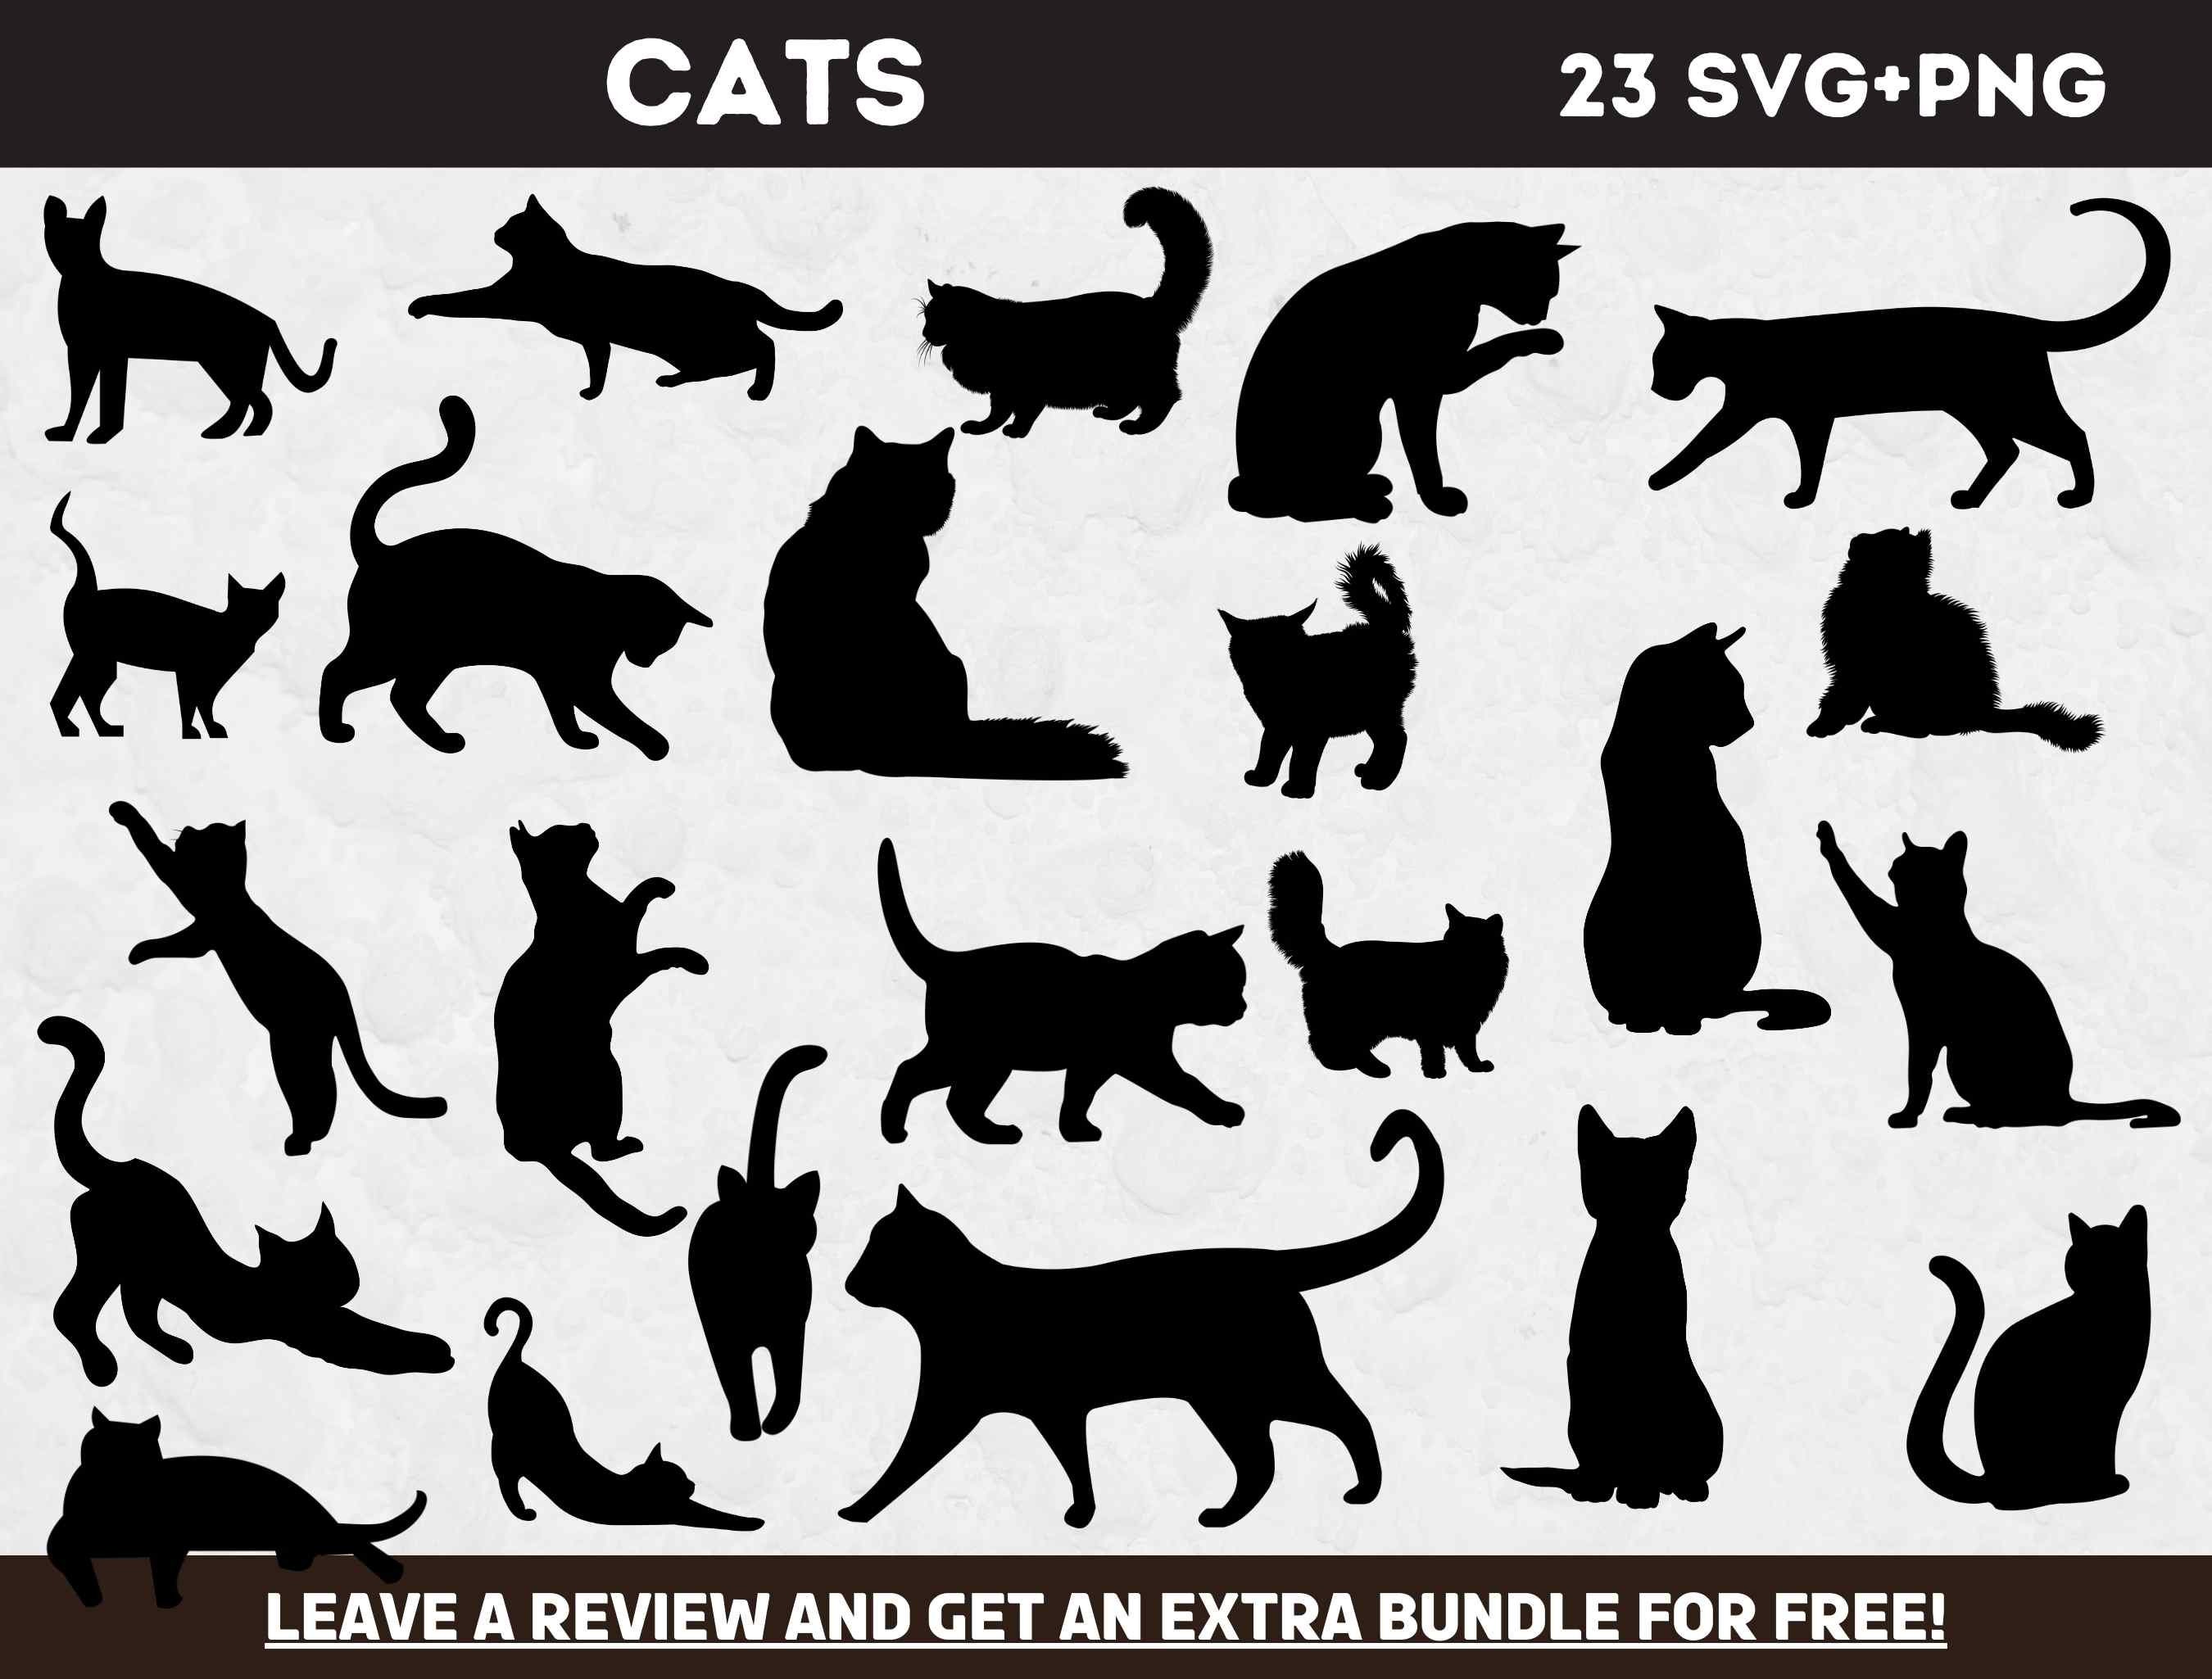 Cat icon, SVG and PNG